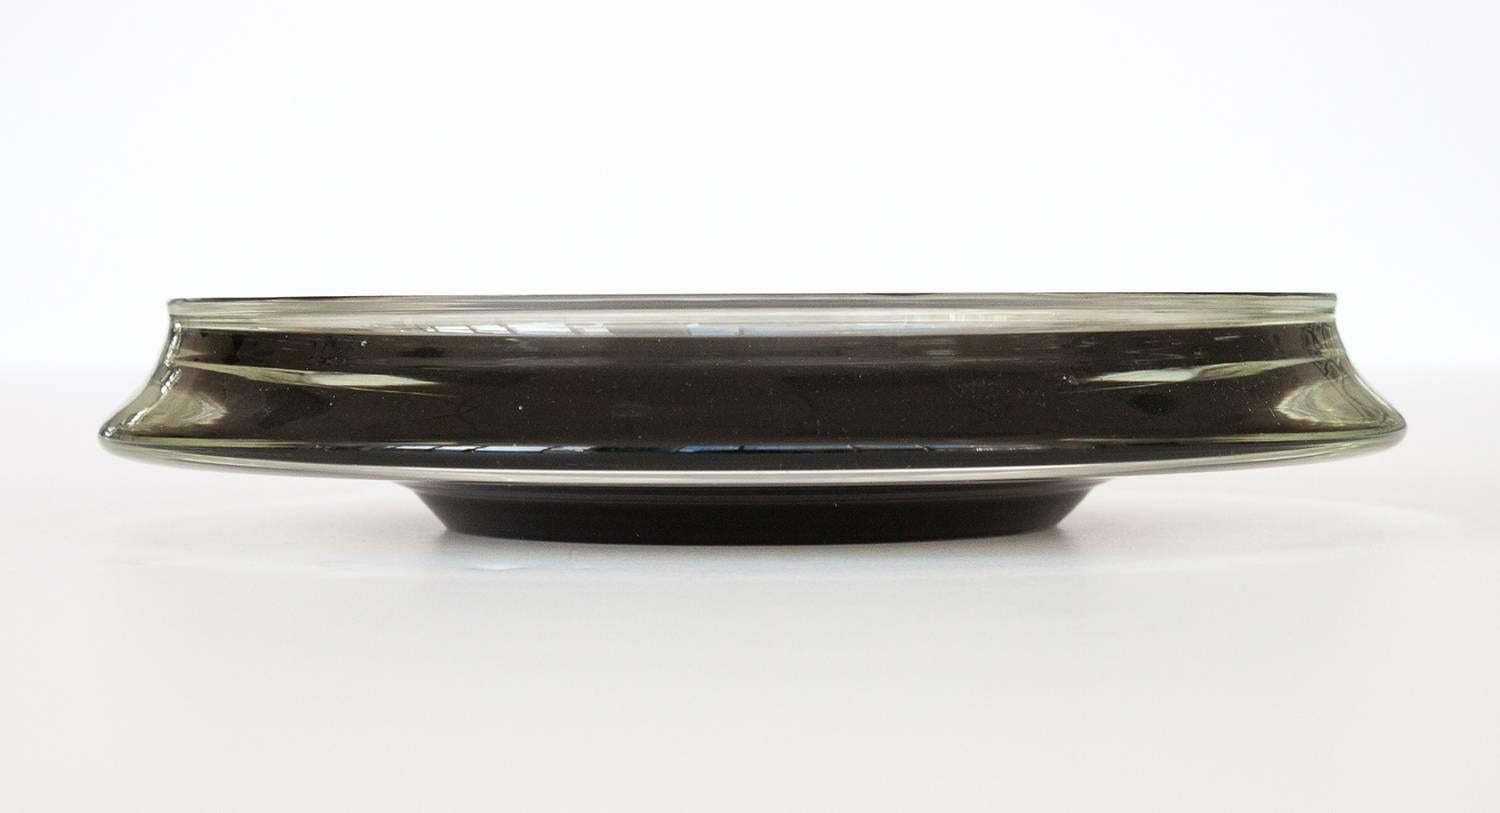 Rare Sergio Asti Murano glass ashtray or low bowl produced by Salviati & Co around 1964. Clear glass with smoke glass center. Unmarked. 

Documented: Part of the Permanent Collection of MOMA (gift of the designer). 

Excellent condition with no